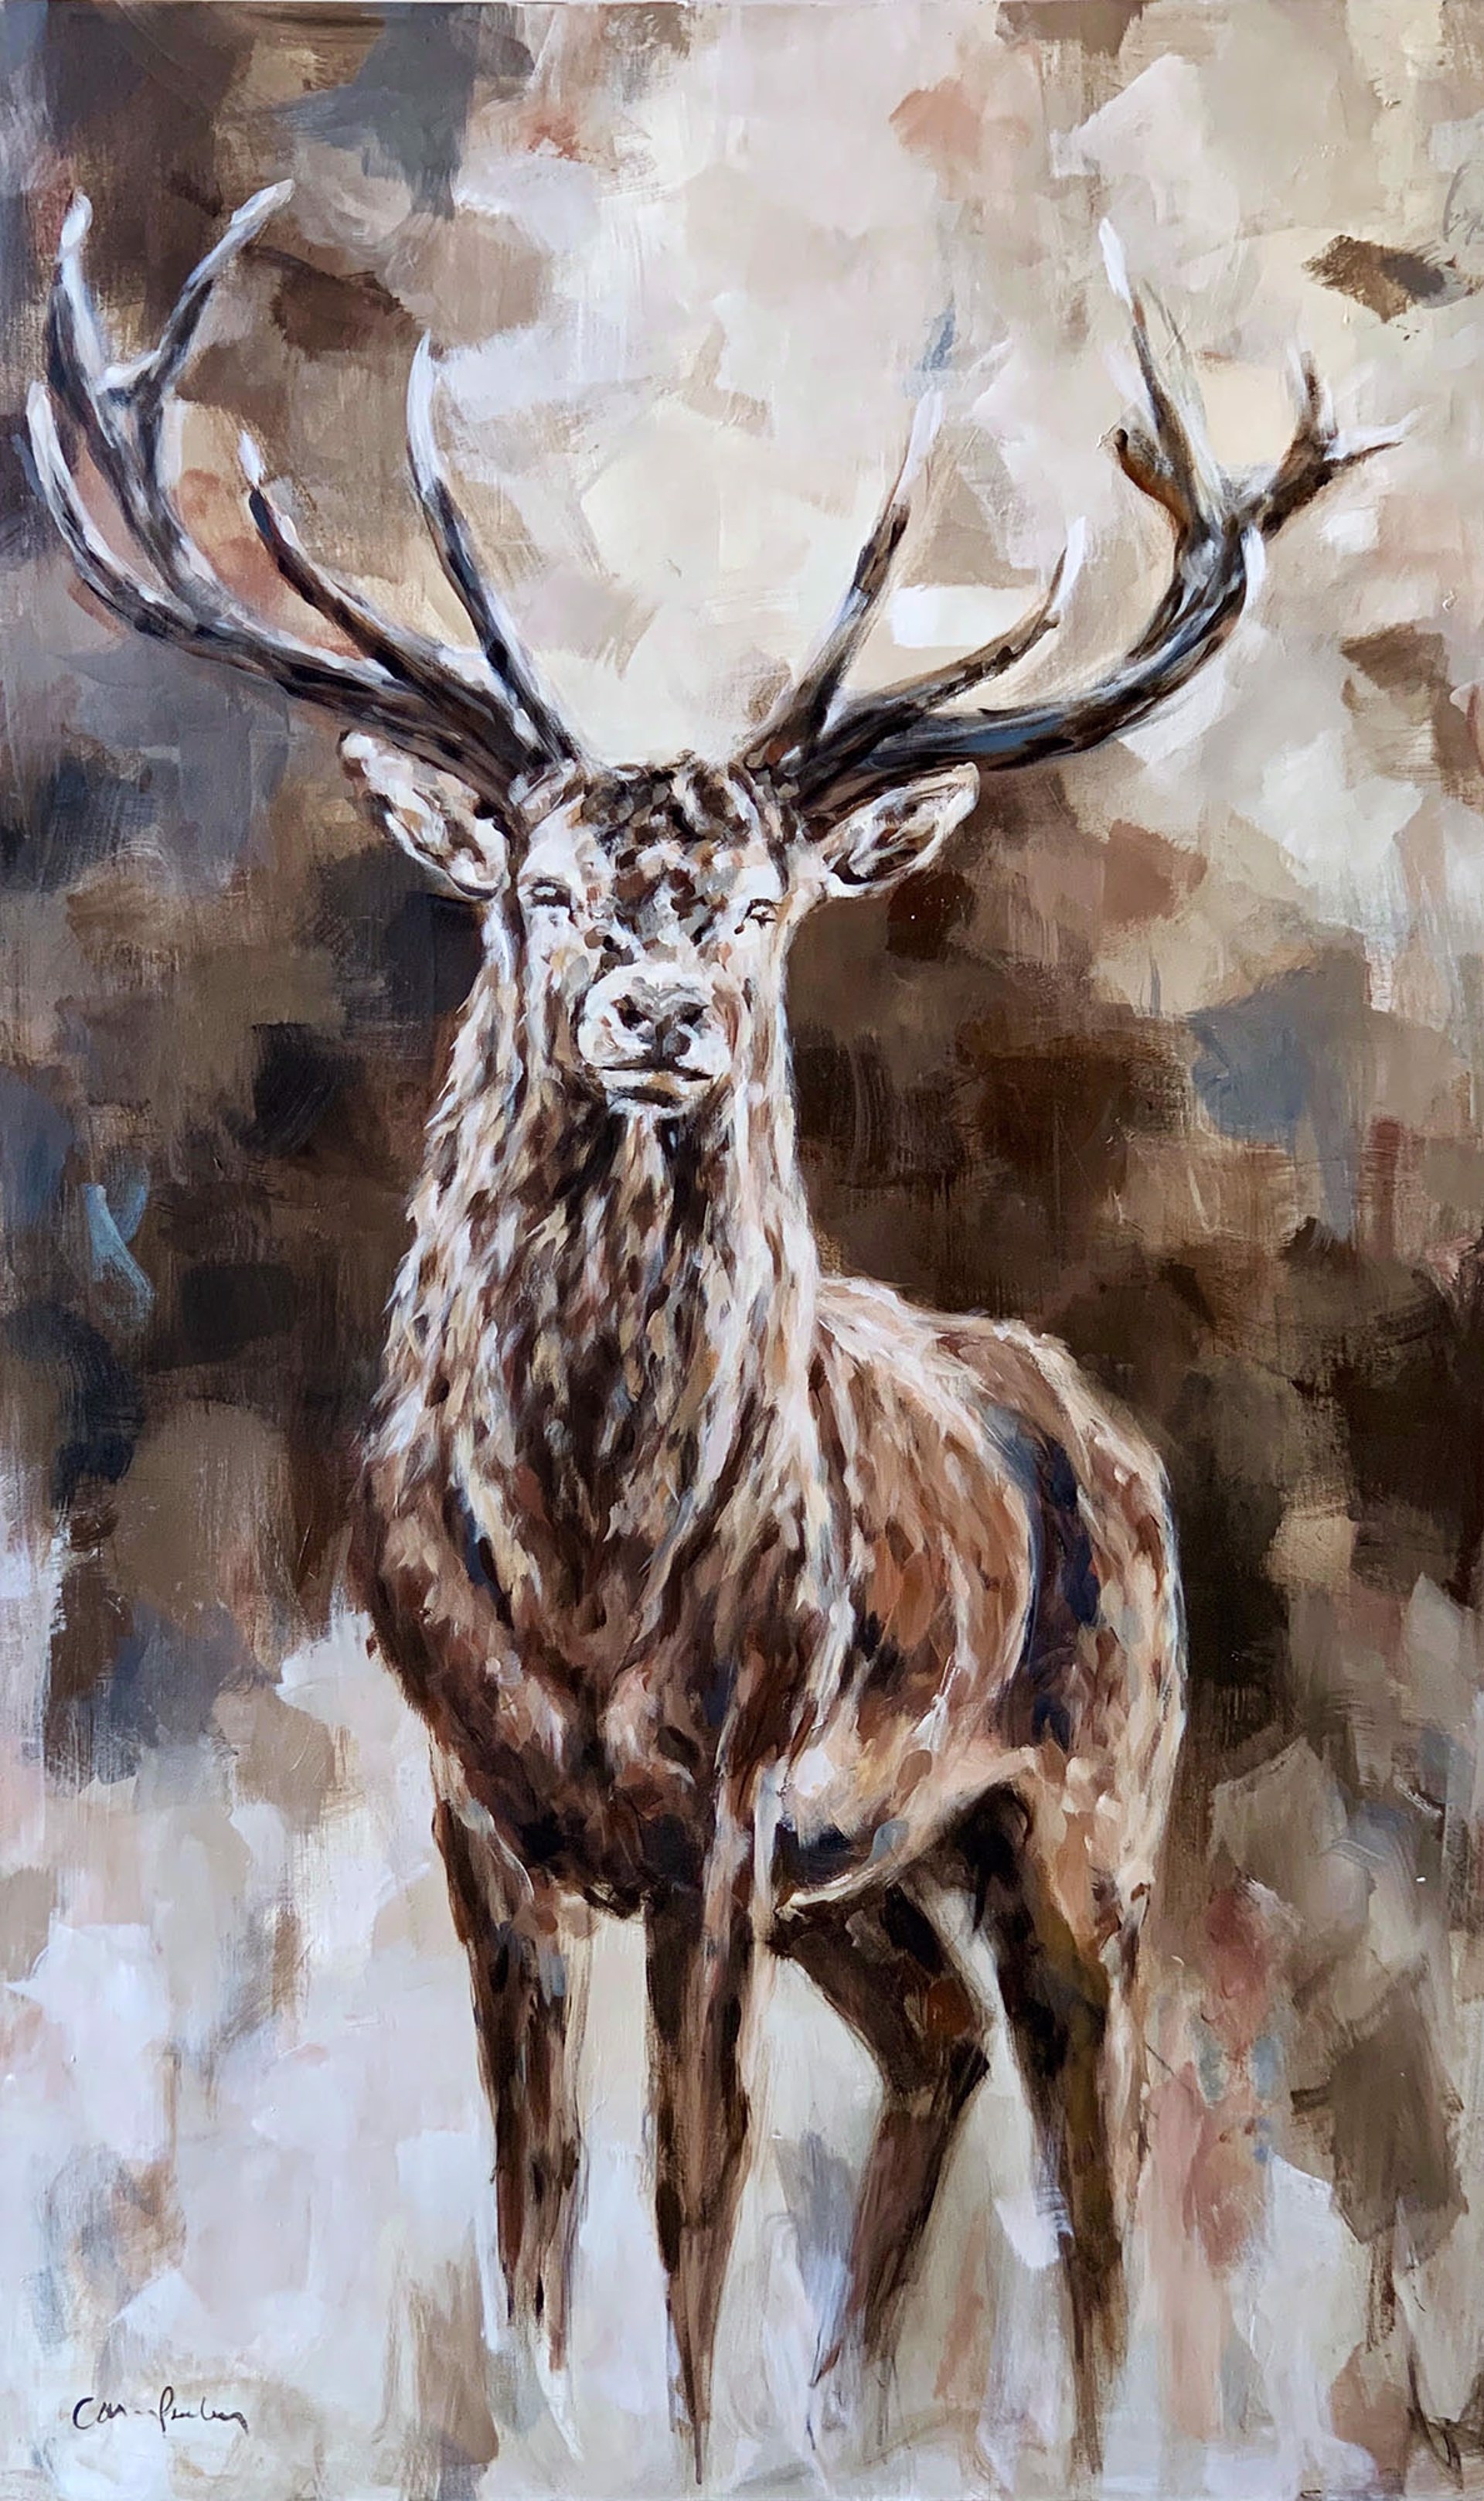 A Contemporary Painting Of A Standing Bull Elk By Carrie Penley Available At Gallery Wild